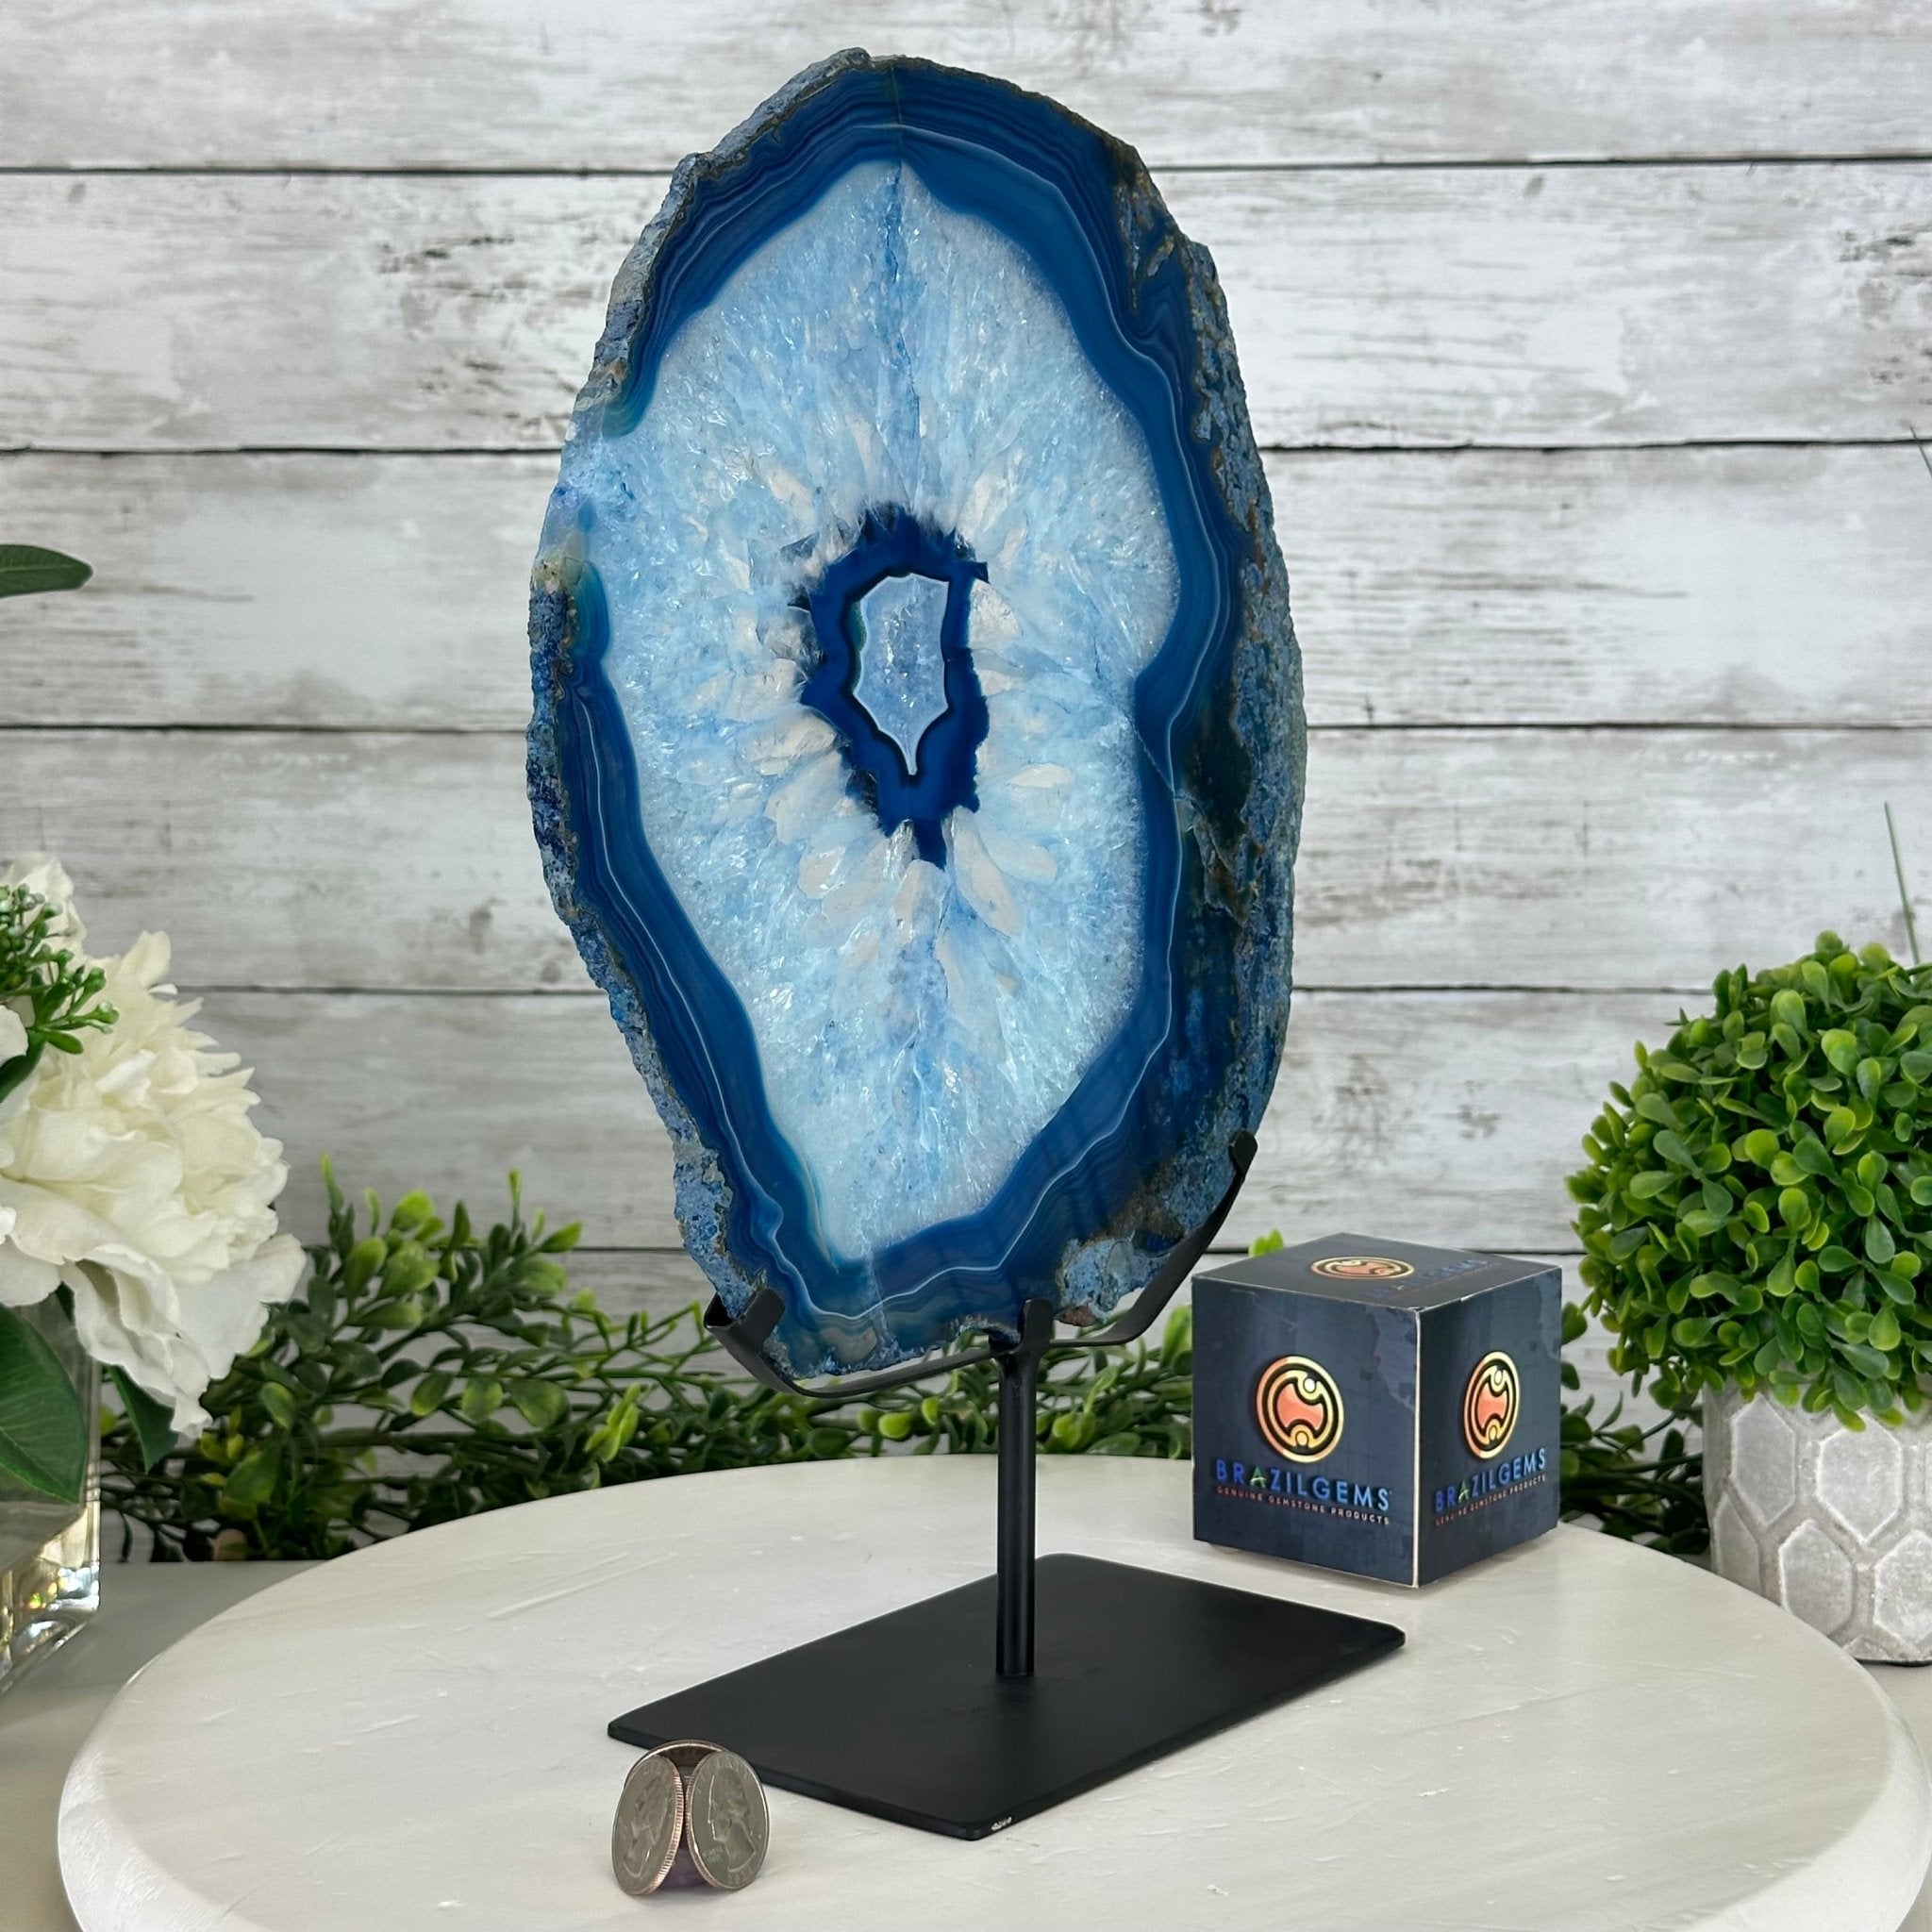 Brazilian Blue Agate Slice on a Metal Stand, 13.3" Tall Model #5055-0159 - Brazil GemsBrazil GemsBrazilian Blue Agate Slice on a Metal Stand, 13.3" Tall Model #5055-0159Slices on Fixed Bases5055-0159